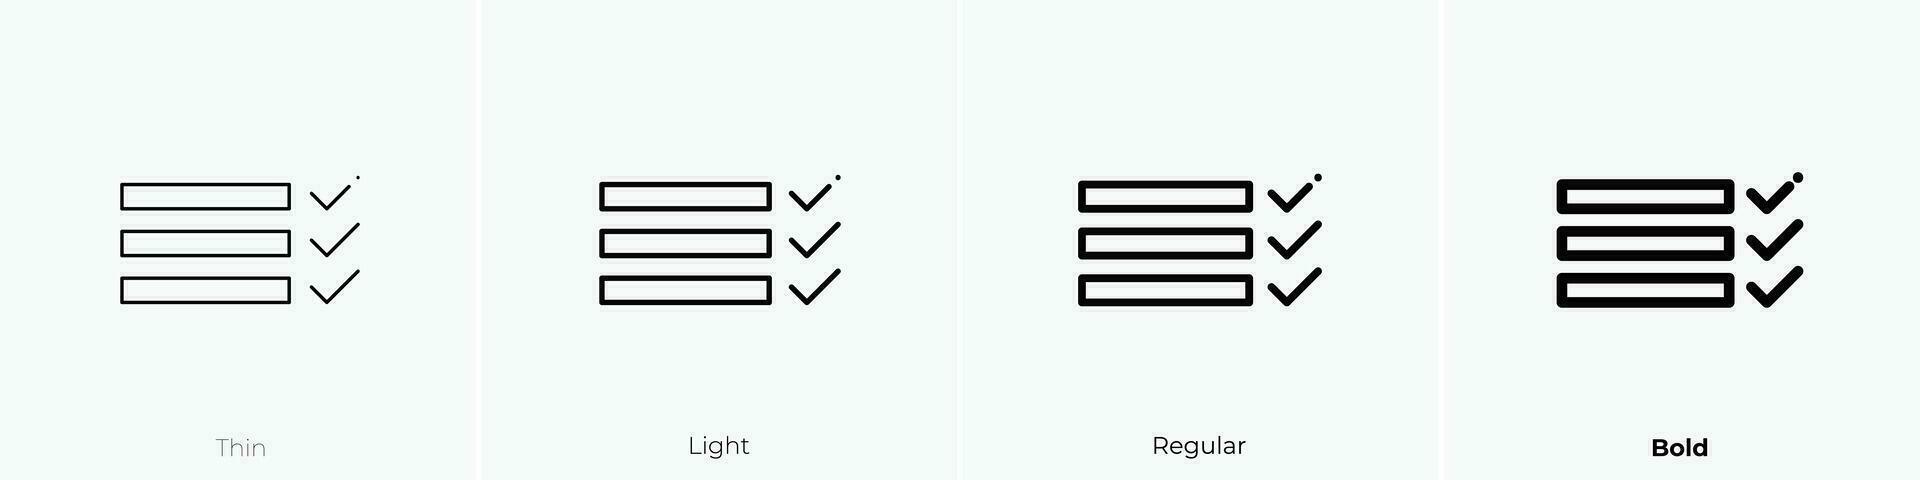 tasks icon. Thin, Light, Regular And Bold style design isolated on white background vector